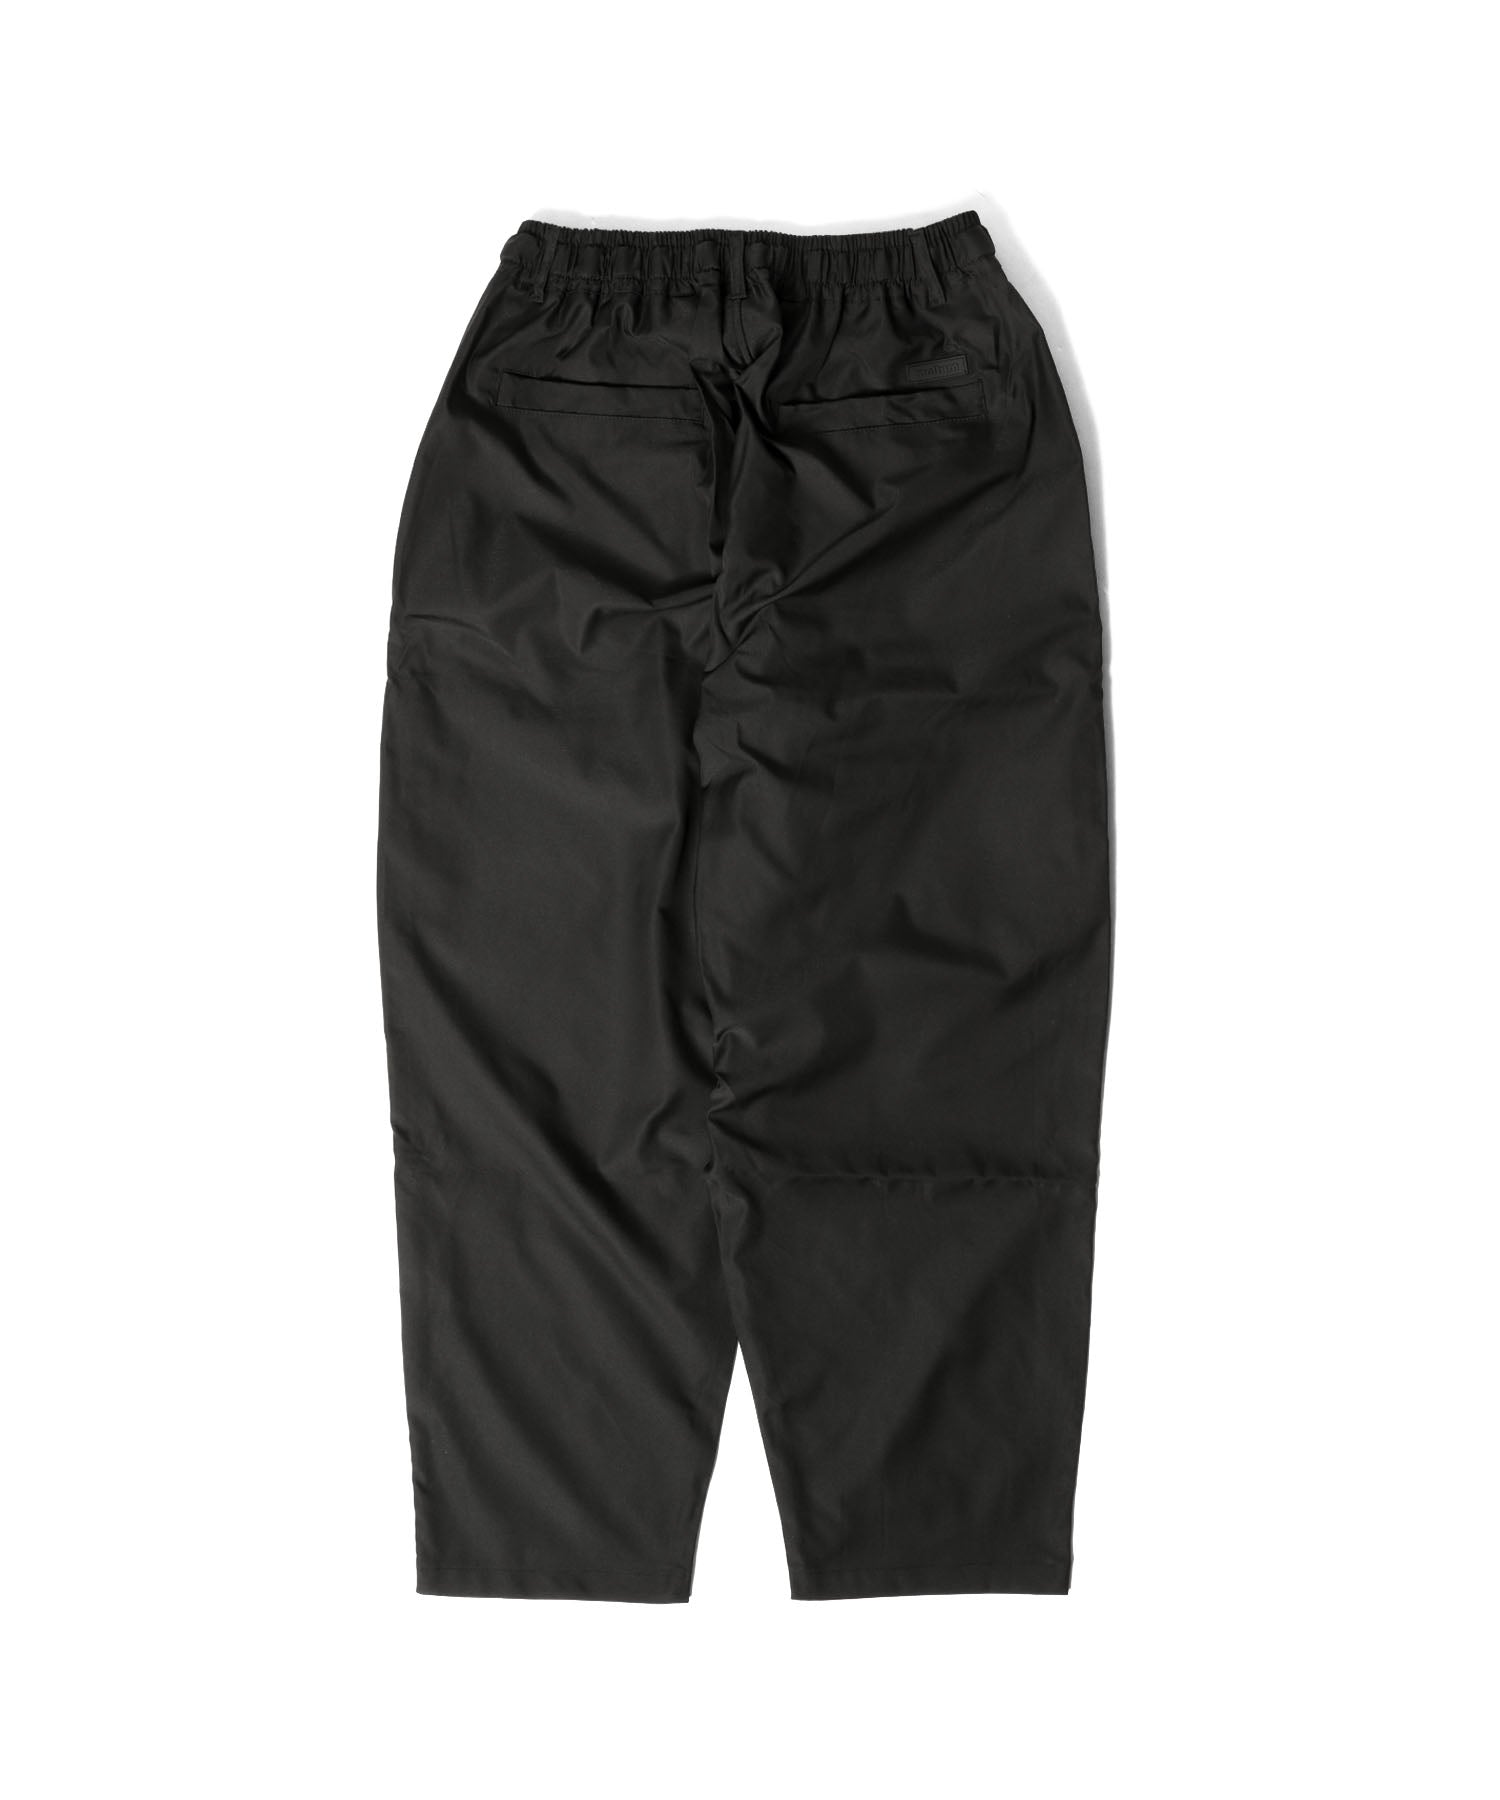 Russell Athletic Men's Tapered Tech Pants